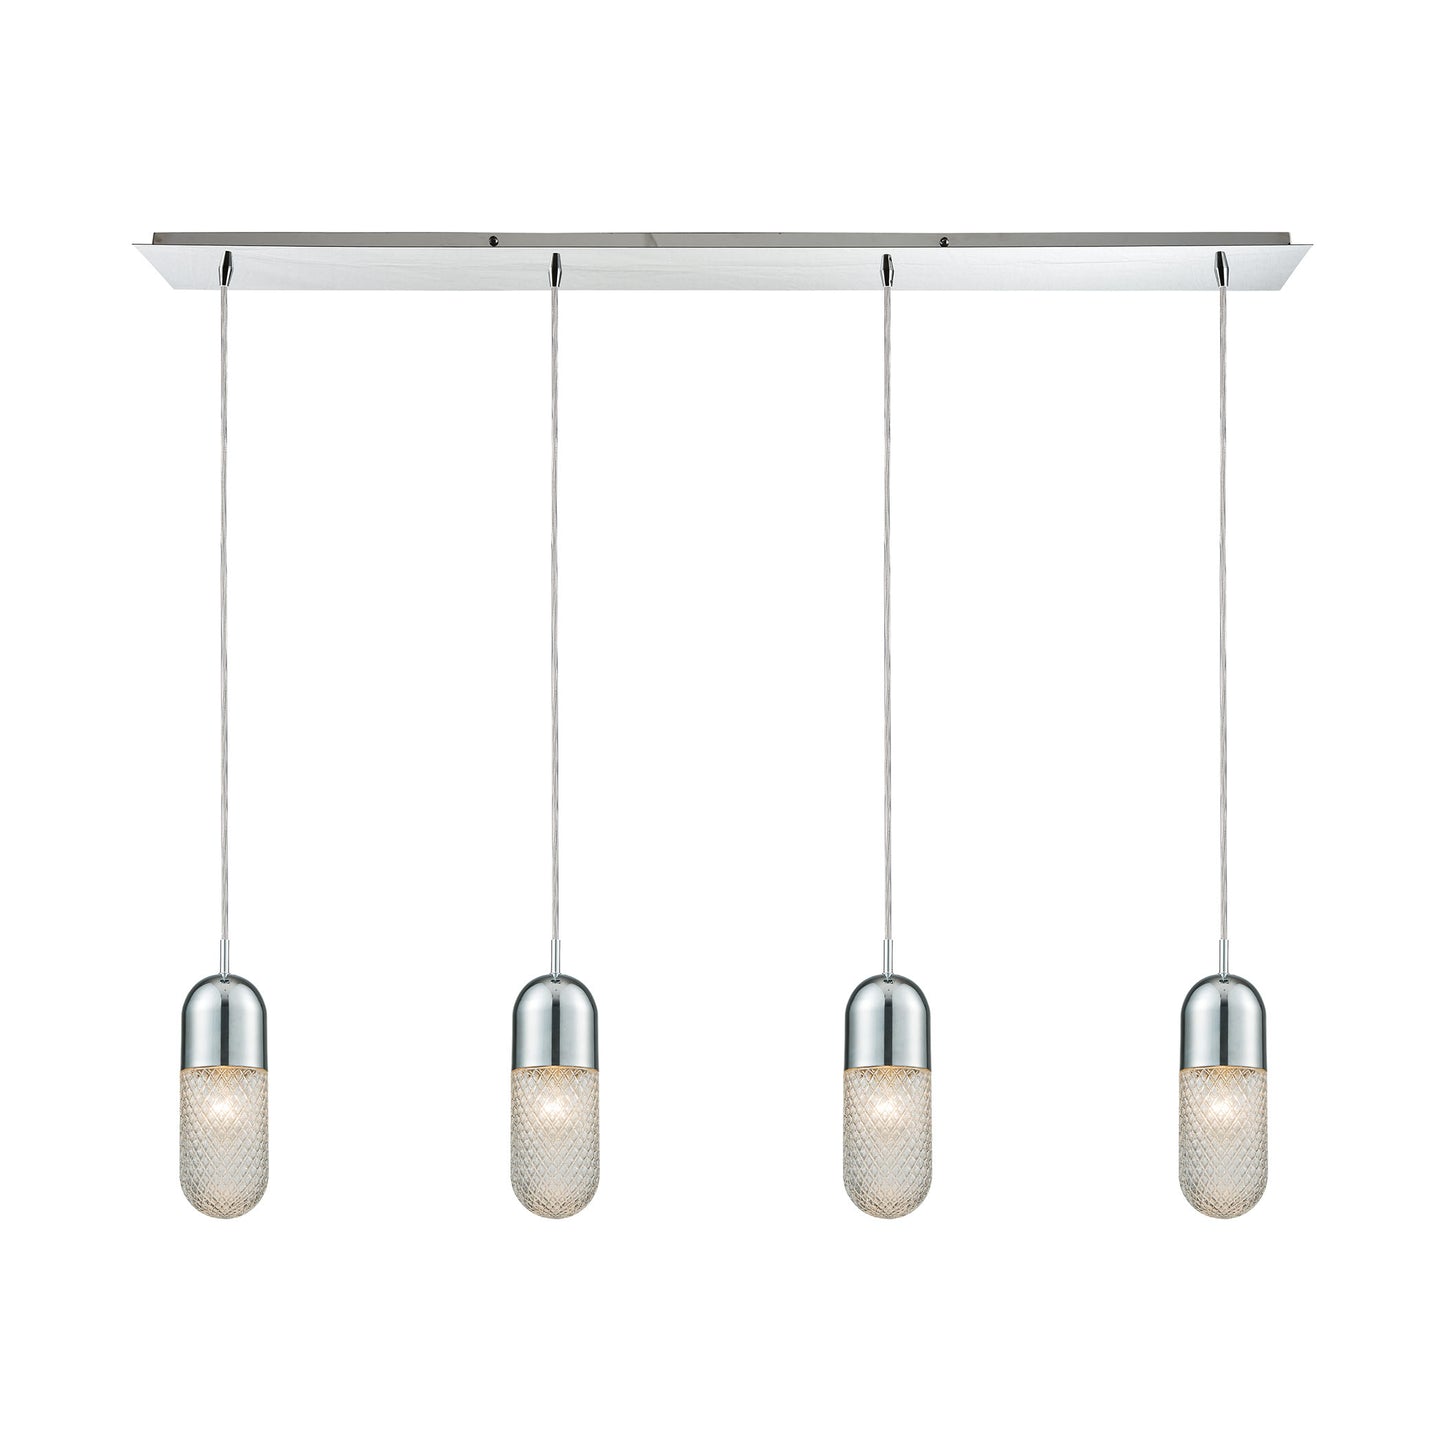 ELK Lighting 56661/4LP - Capsula 46" Wide 4-Light Linear Pendant Fixture in Polished Chrome with Cle